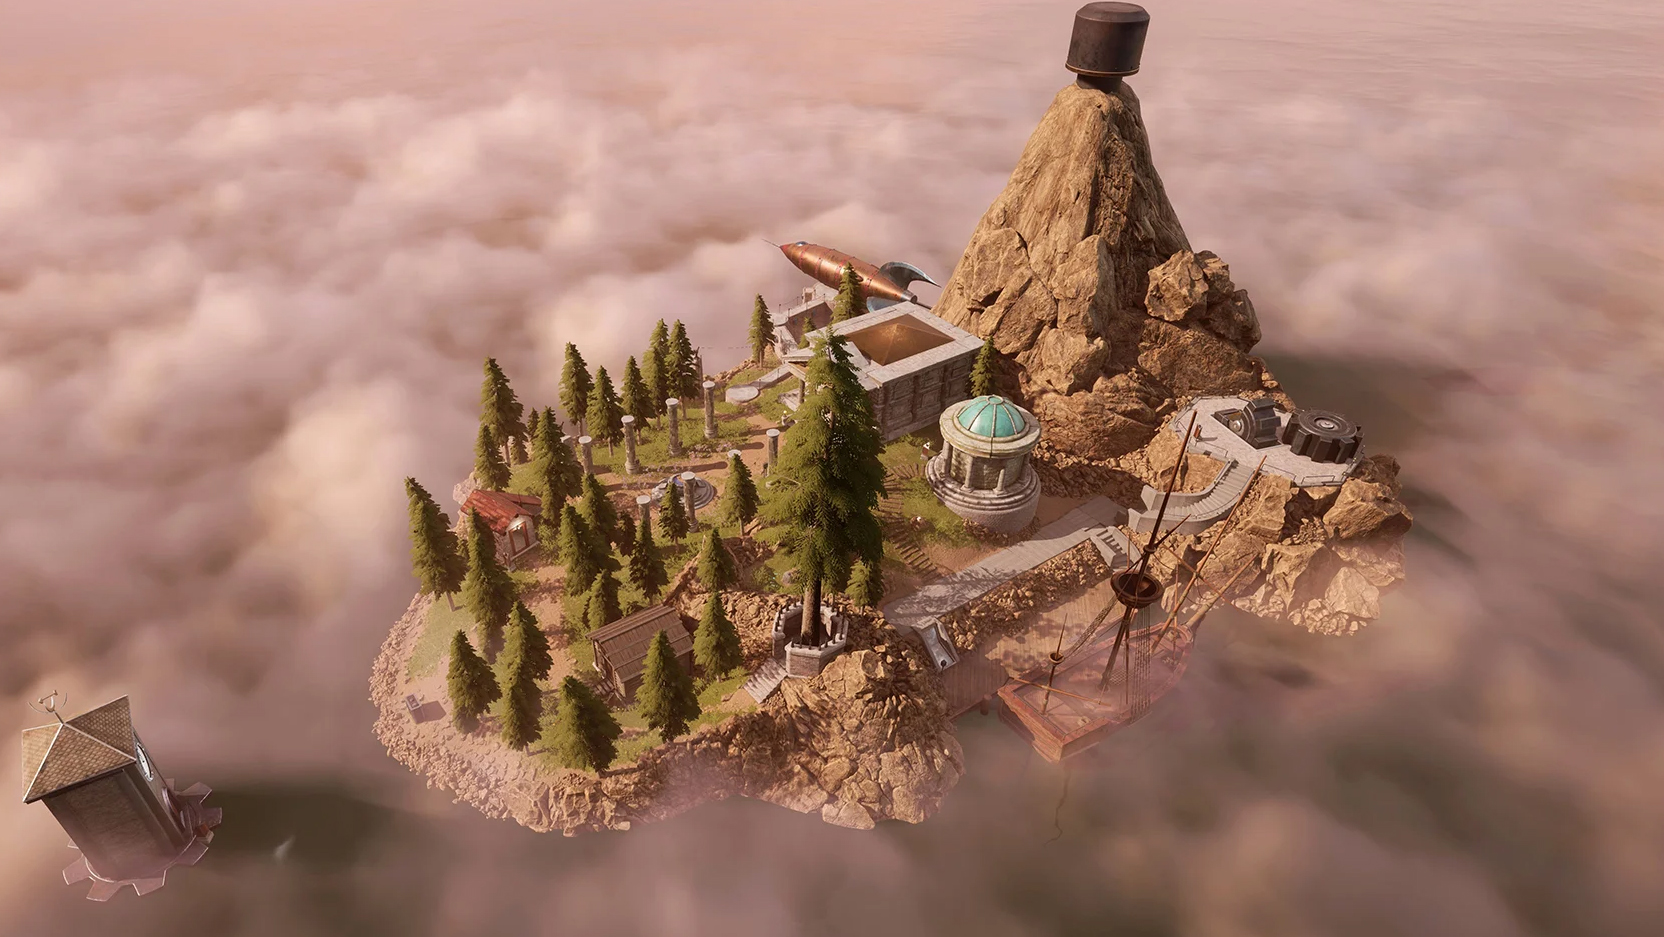 myst review